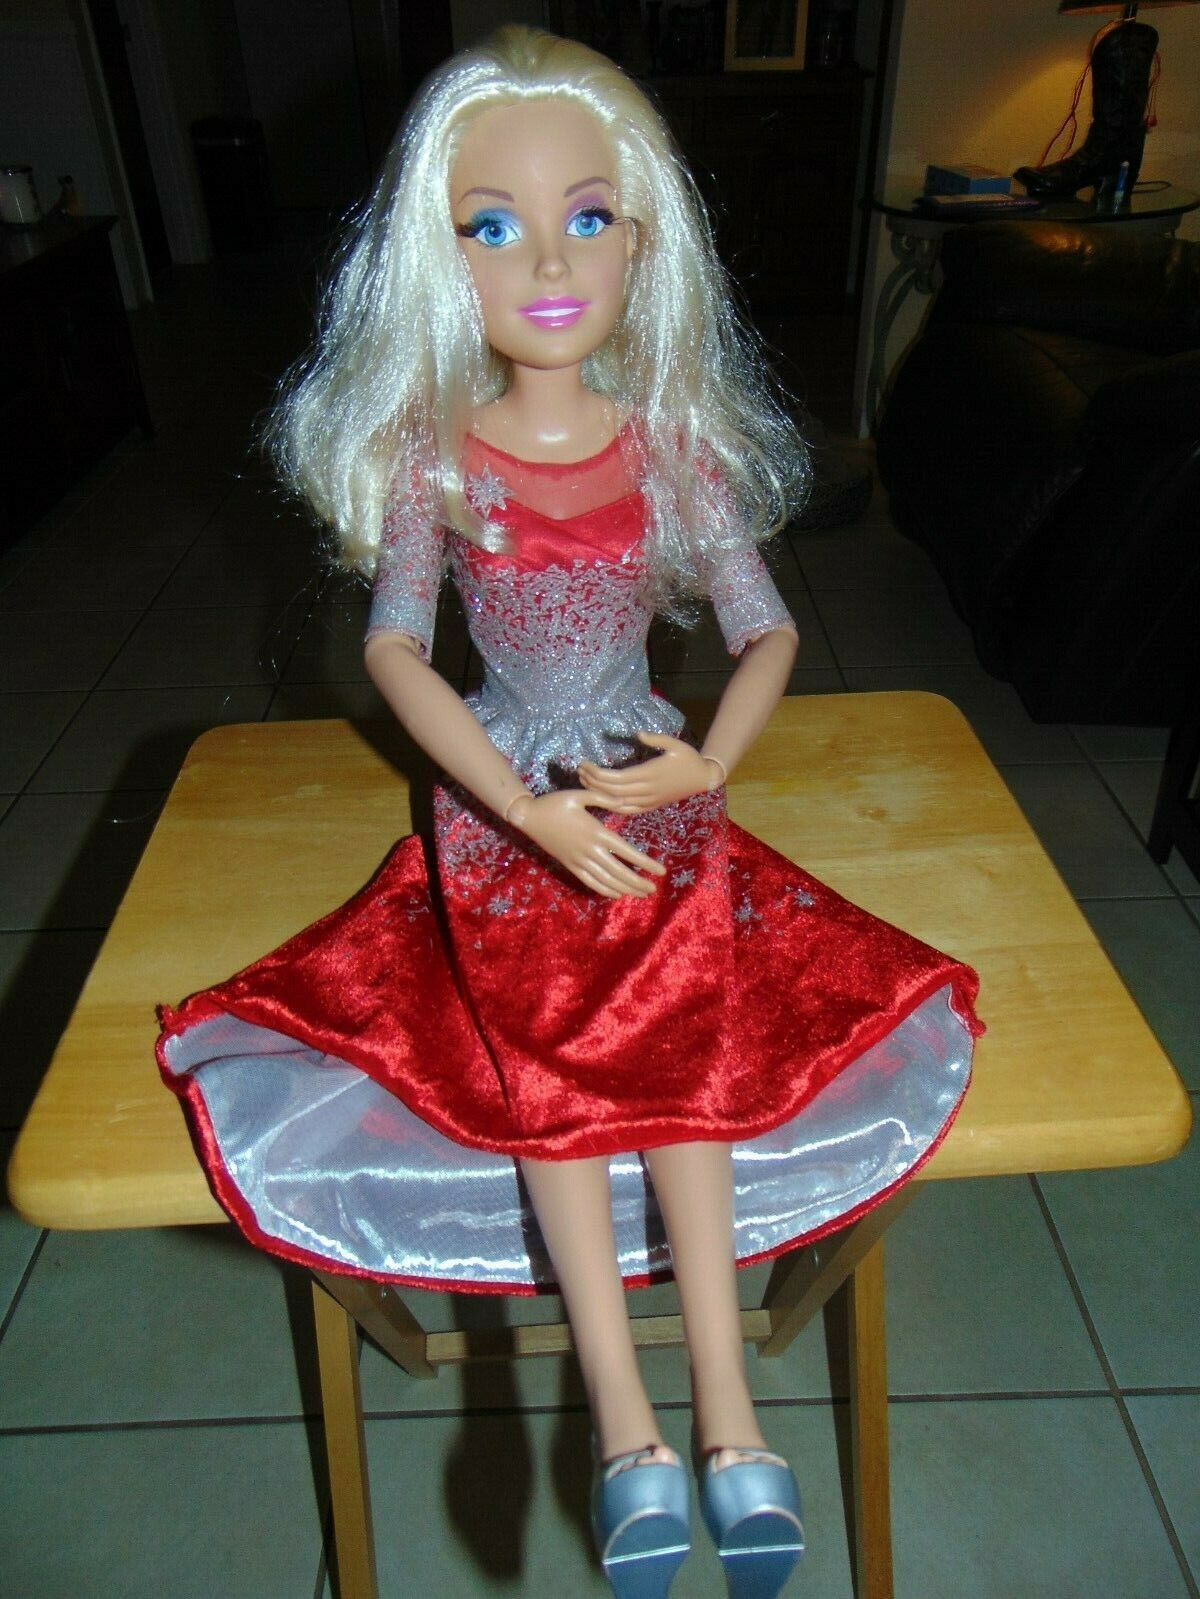 Mattel Barbie Blonde 28" Just Play Doll W/ Jointed Arms Hands & Red/silver Dress